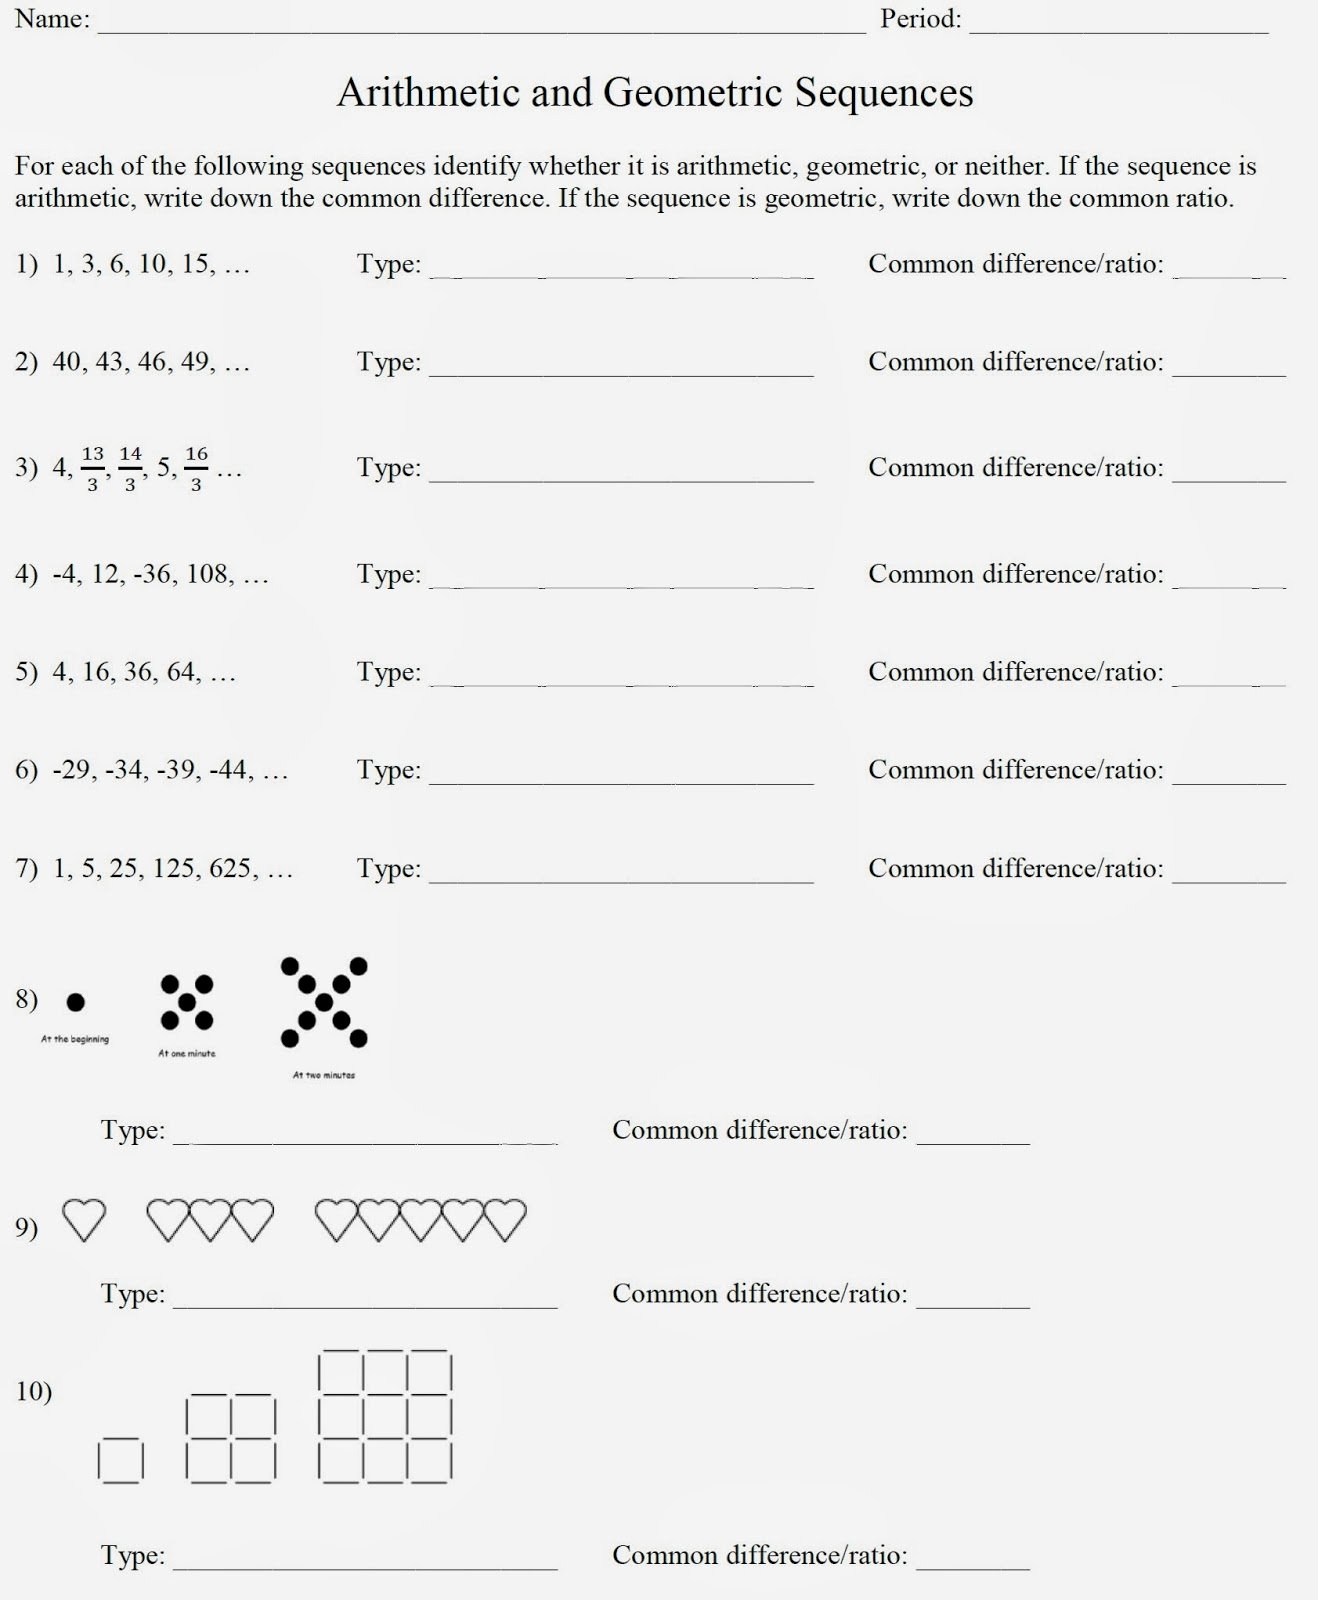 Geometric and Arithmetic Sequence Worksheet Beautiful Mr Matt S Math Classes assignment Arithmetic and